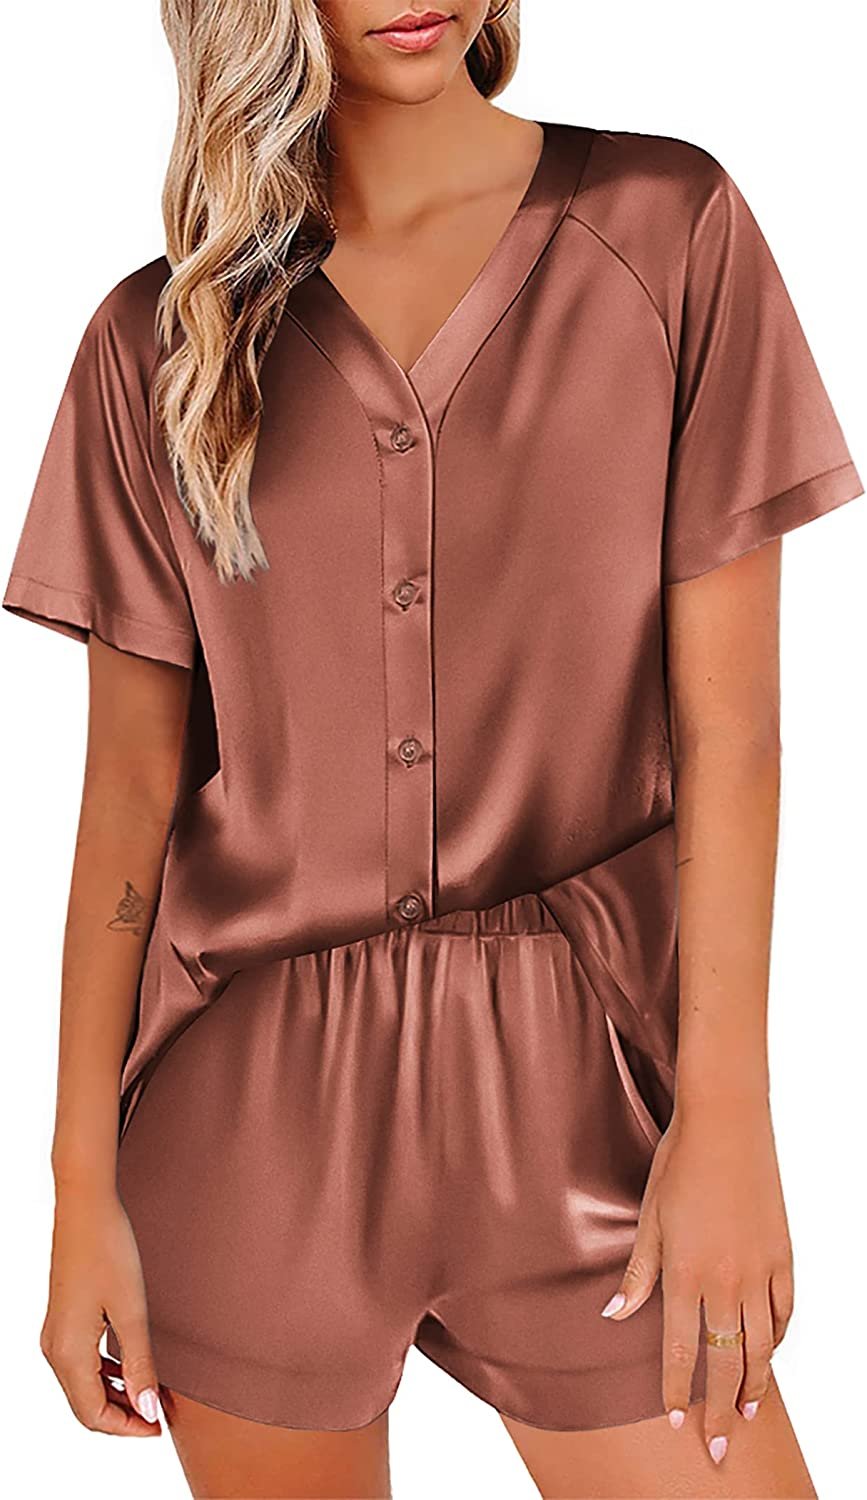 Muted Buttons - Button Down Top with Shorts